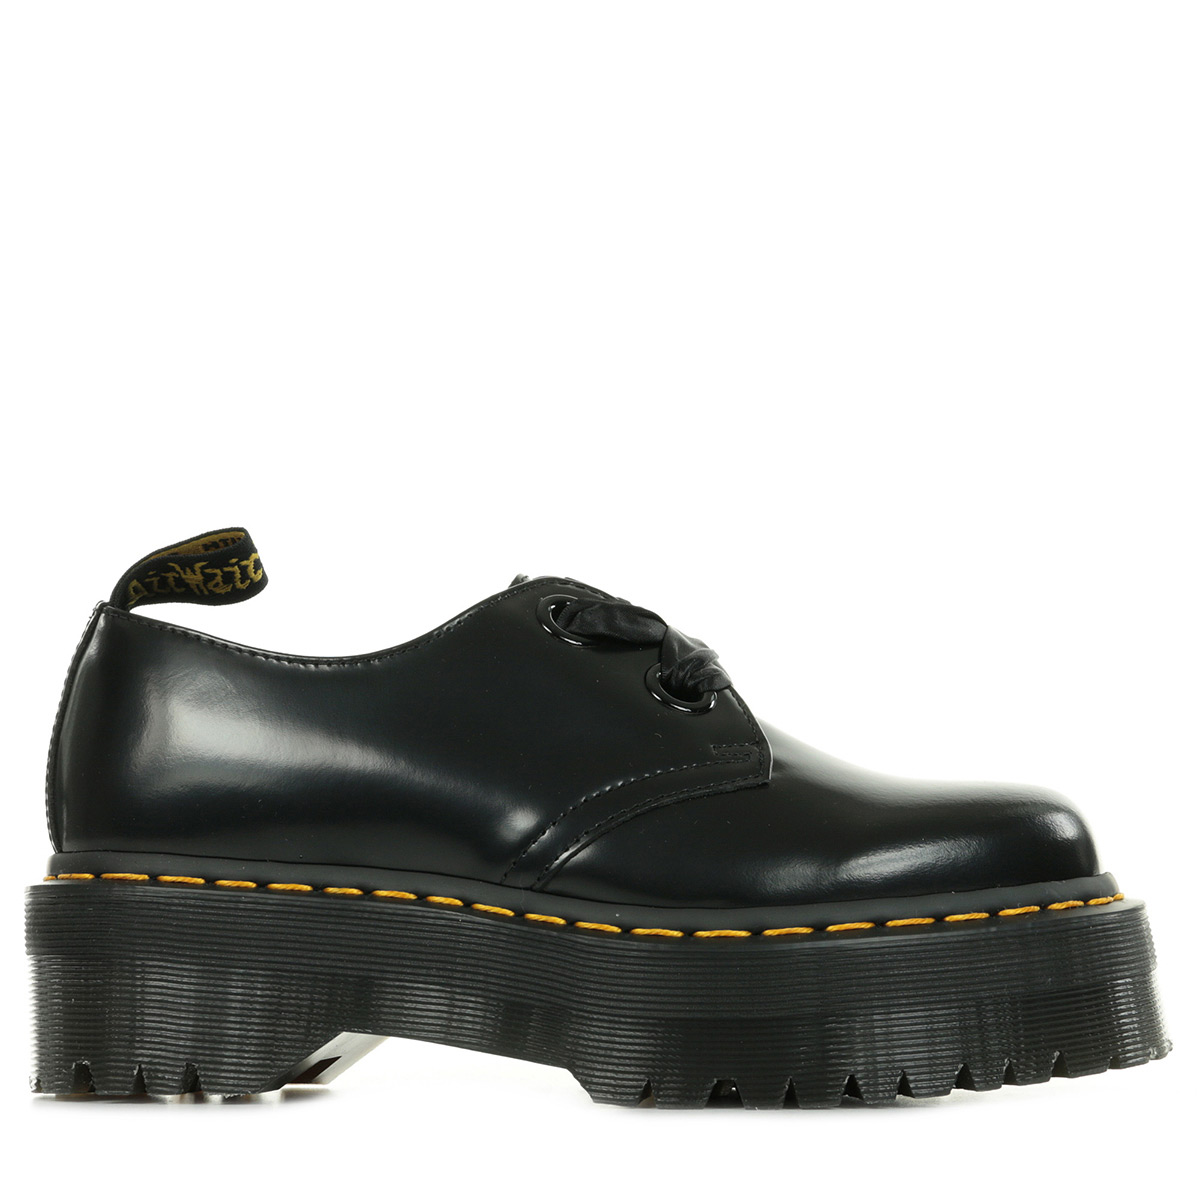 Dr. Martens Holly